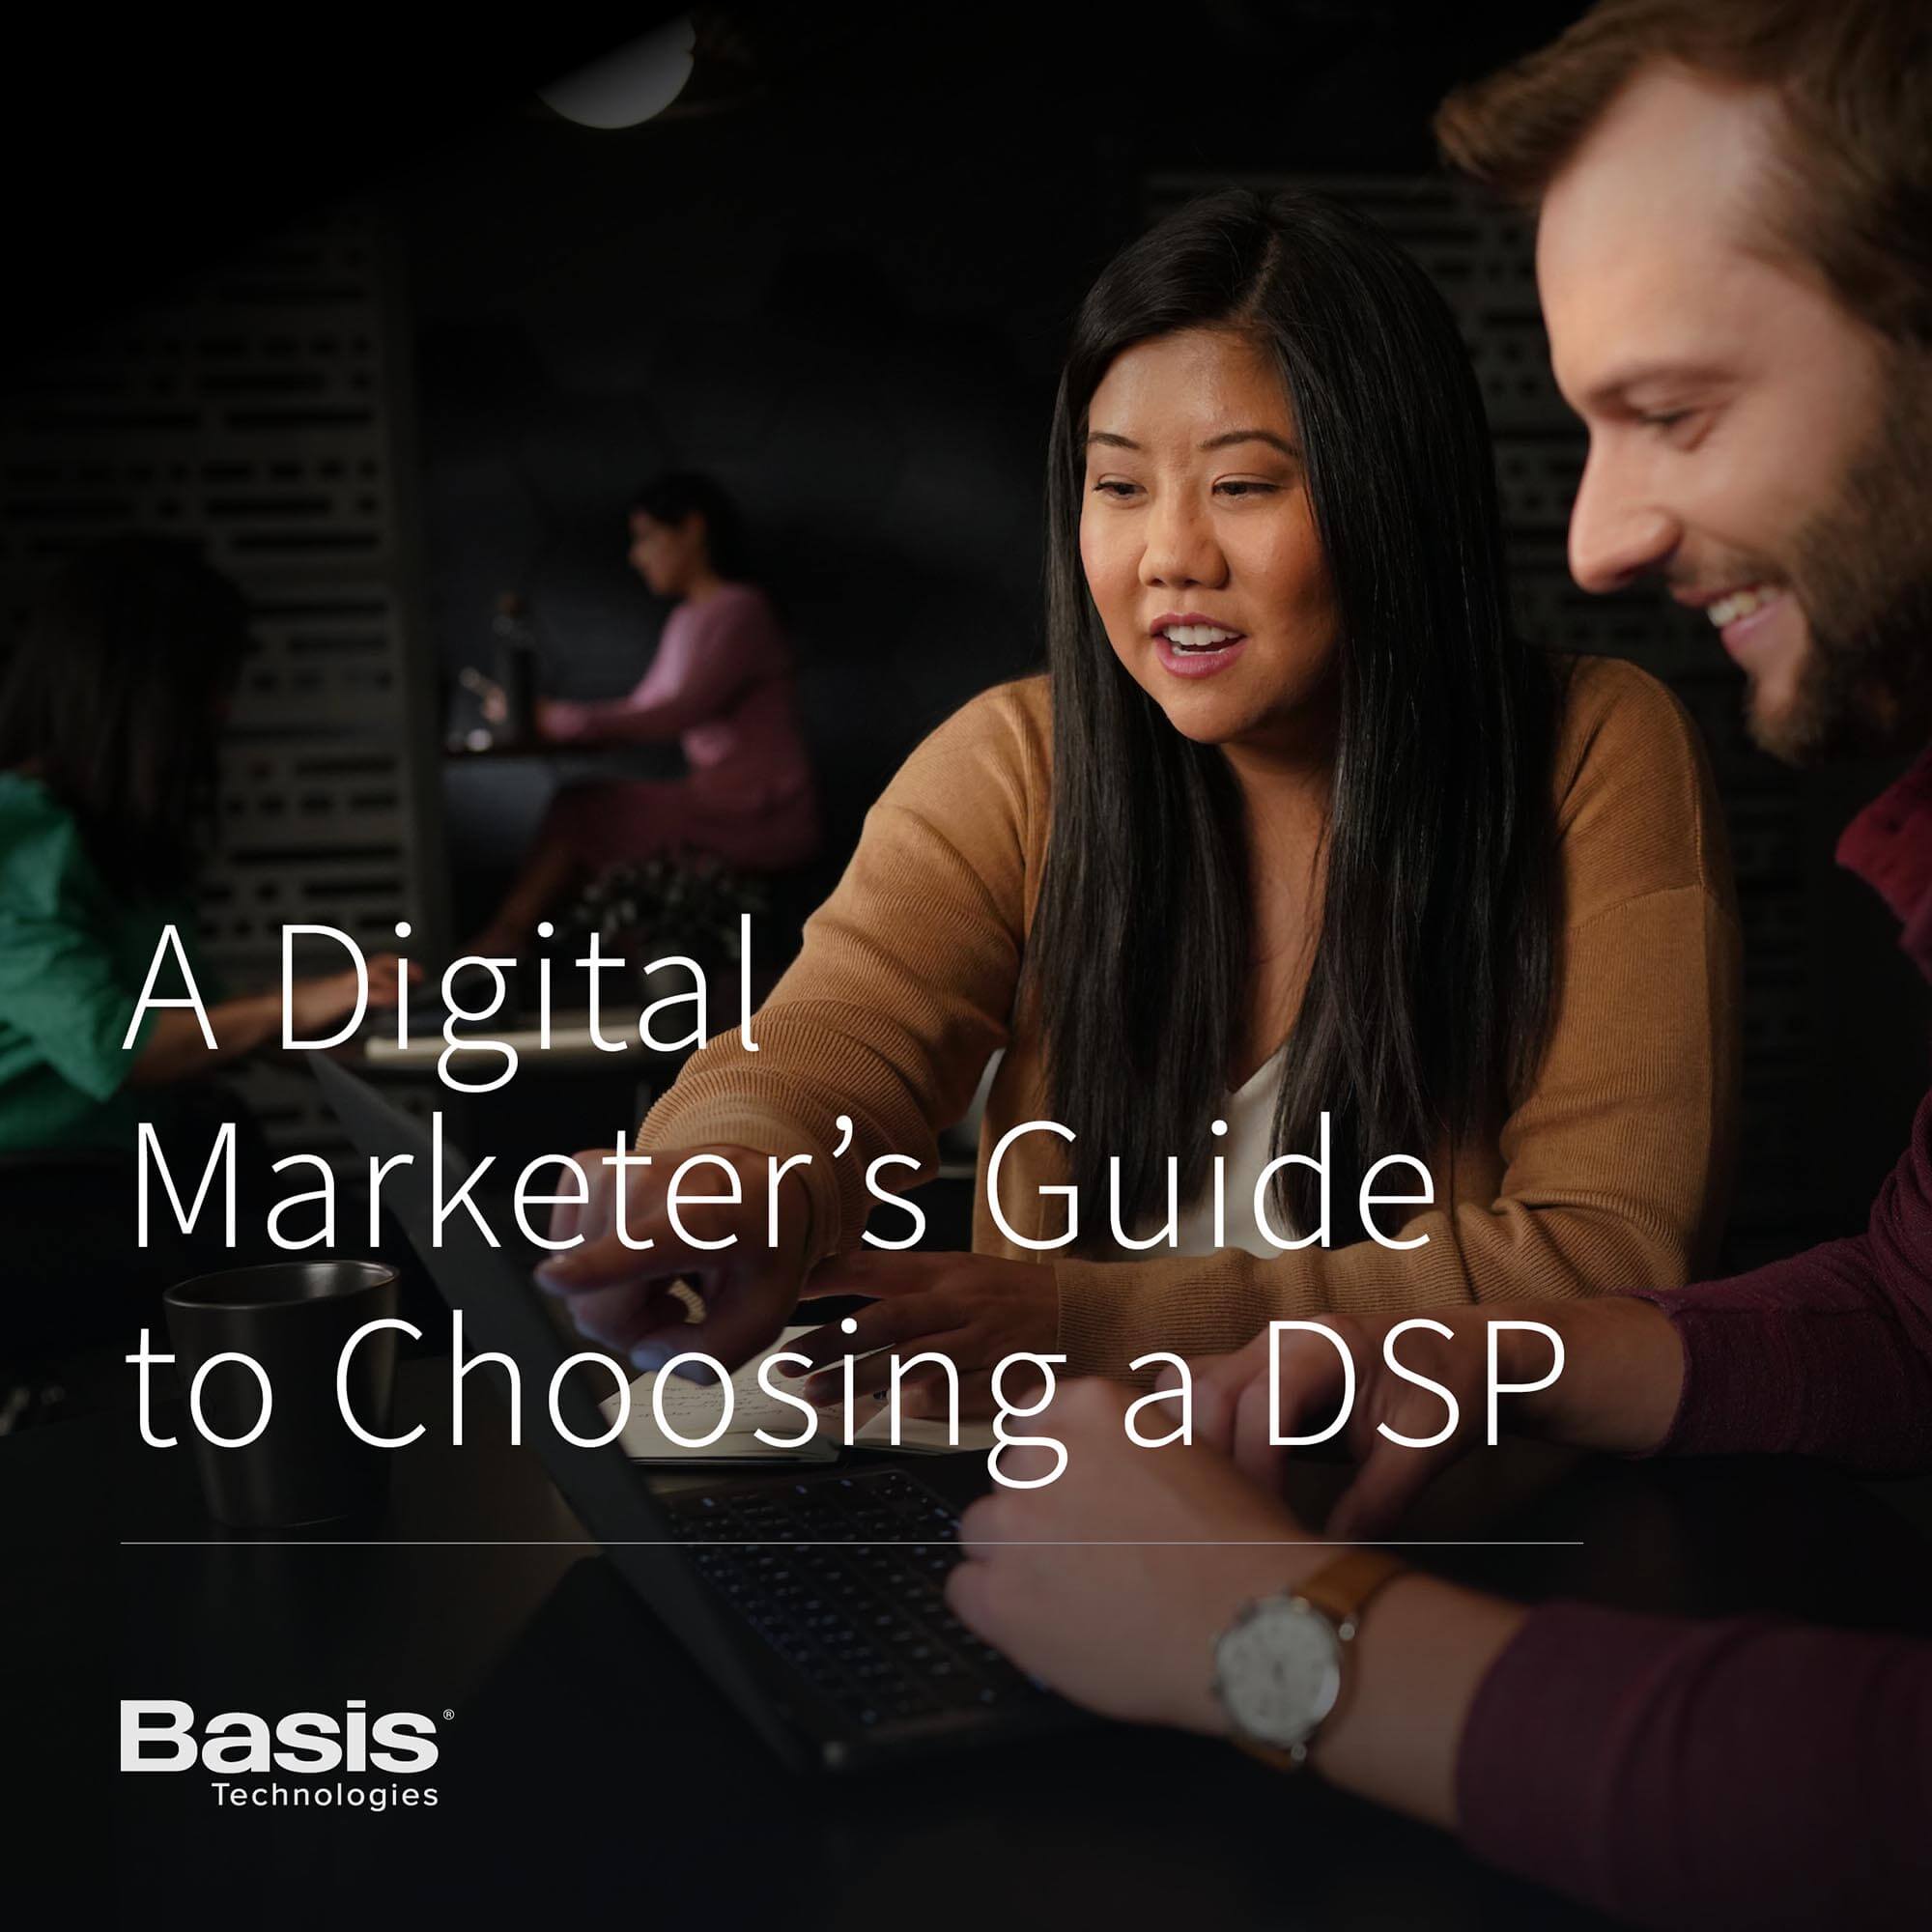 A Digital Marketer's Guide to Choosing a DSP guide cover